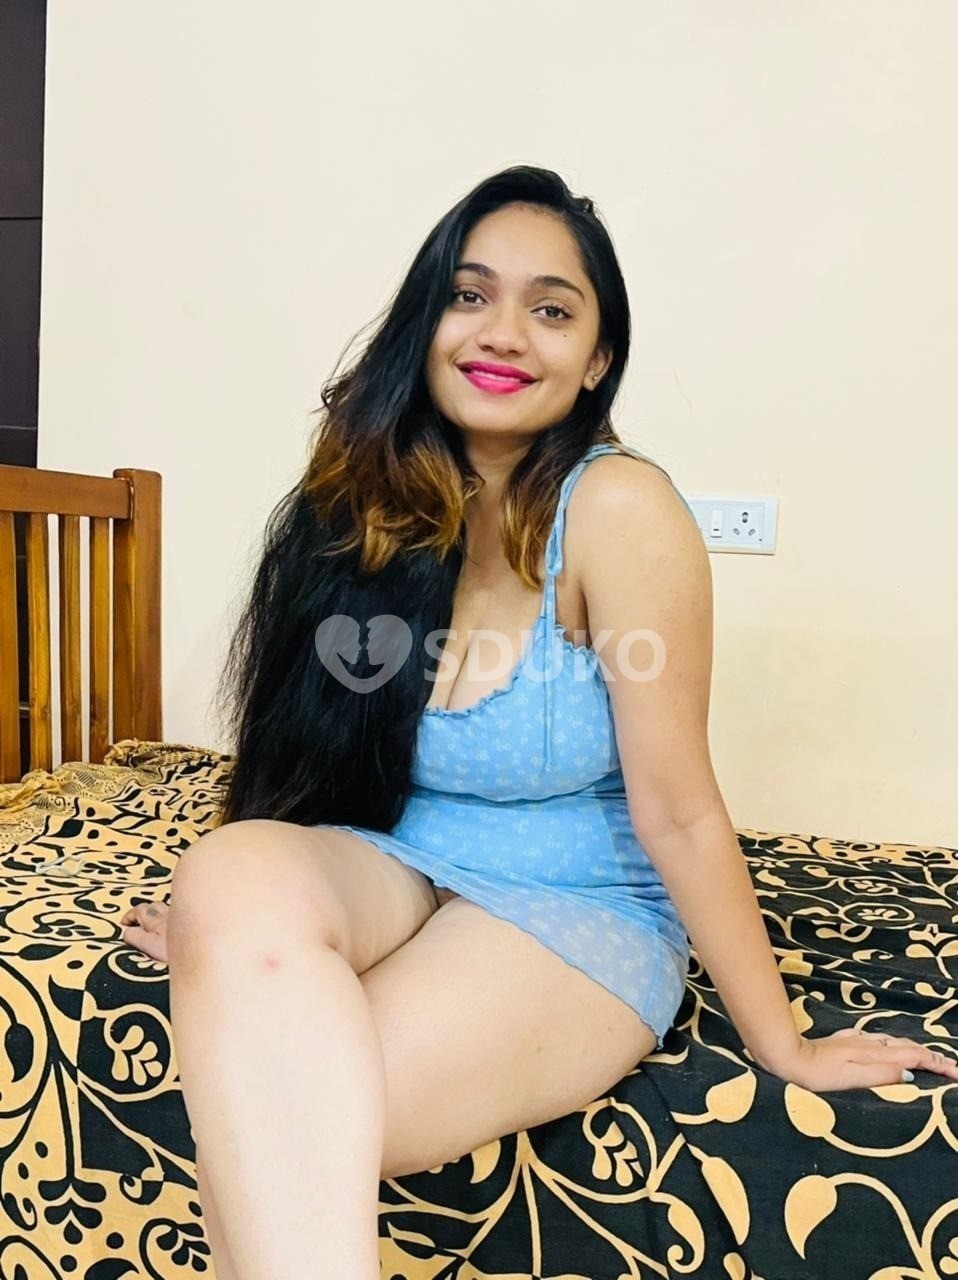 Ambala in ⭐⭐⭐ low budget college girls available home and hotel sarvice